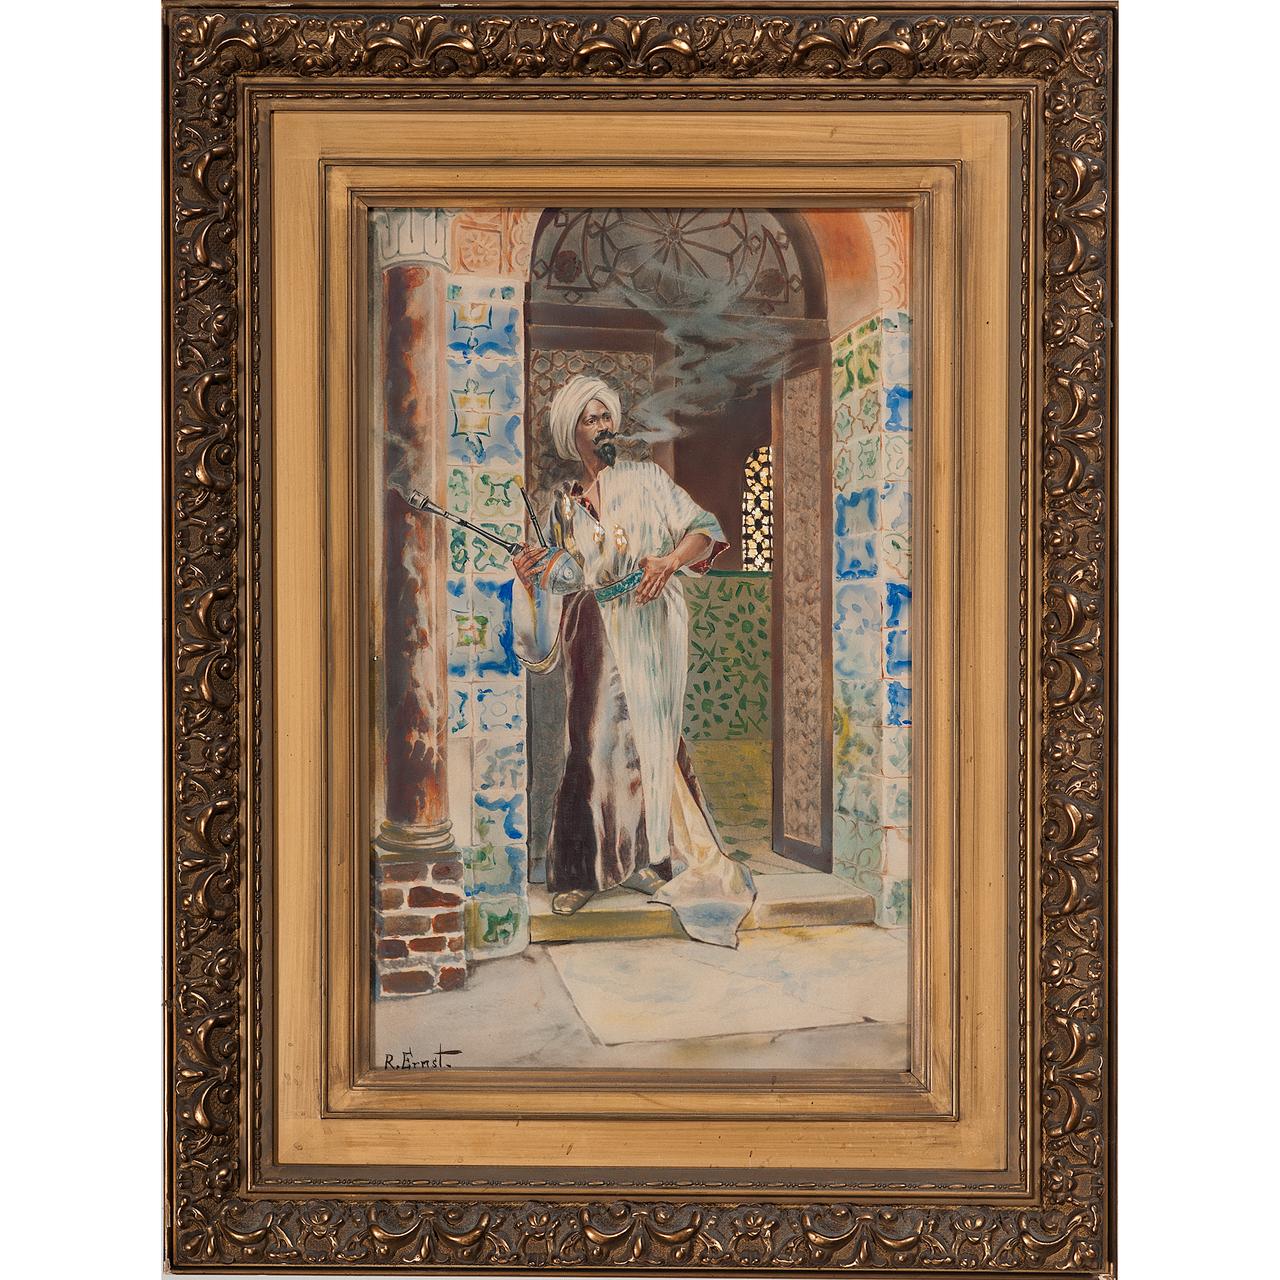 A fine Orientalist watercolor on paper, signed lower left, depicting an Arab man smoking a pipe in the doorway.

Artist: Rudolf Ernst (1854-1932)
Origin: French-Austrian
Medium: Watercolor on paper
Dimension: 19 1/2 in x 12 1/4 in